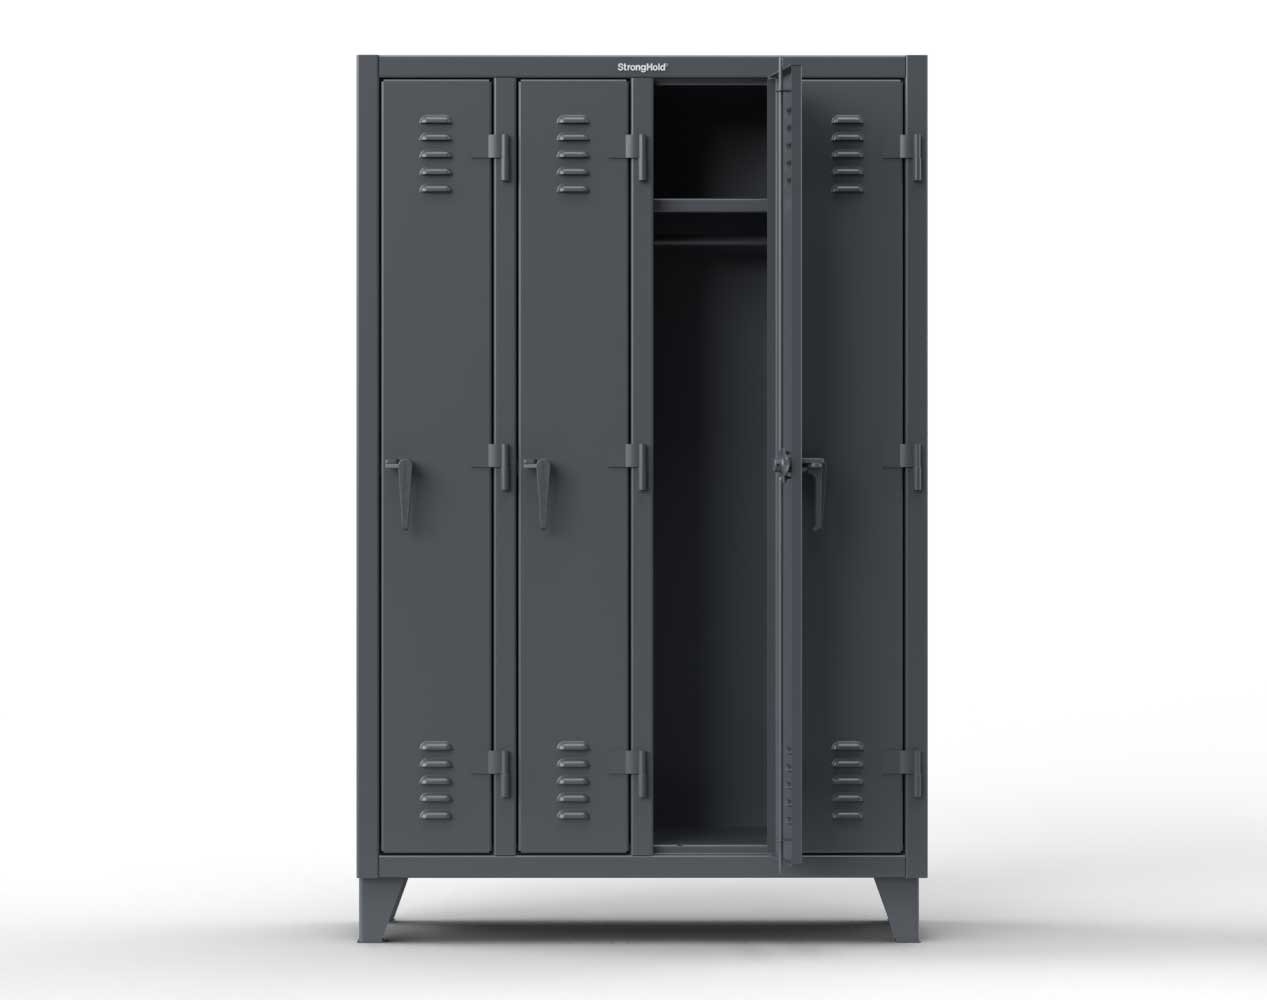 Extreme Duty 12 GA Single-Tier Locker with 10 Compartments, Louvered Doors, Wardrobe Rod - 122 in. W x 18in. D x 78 in. H